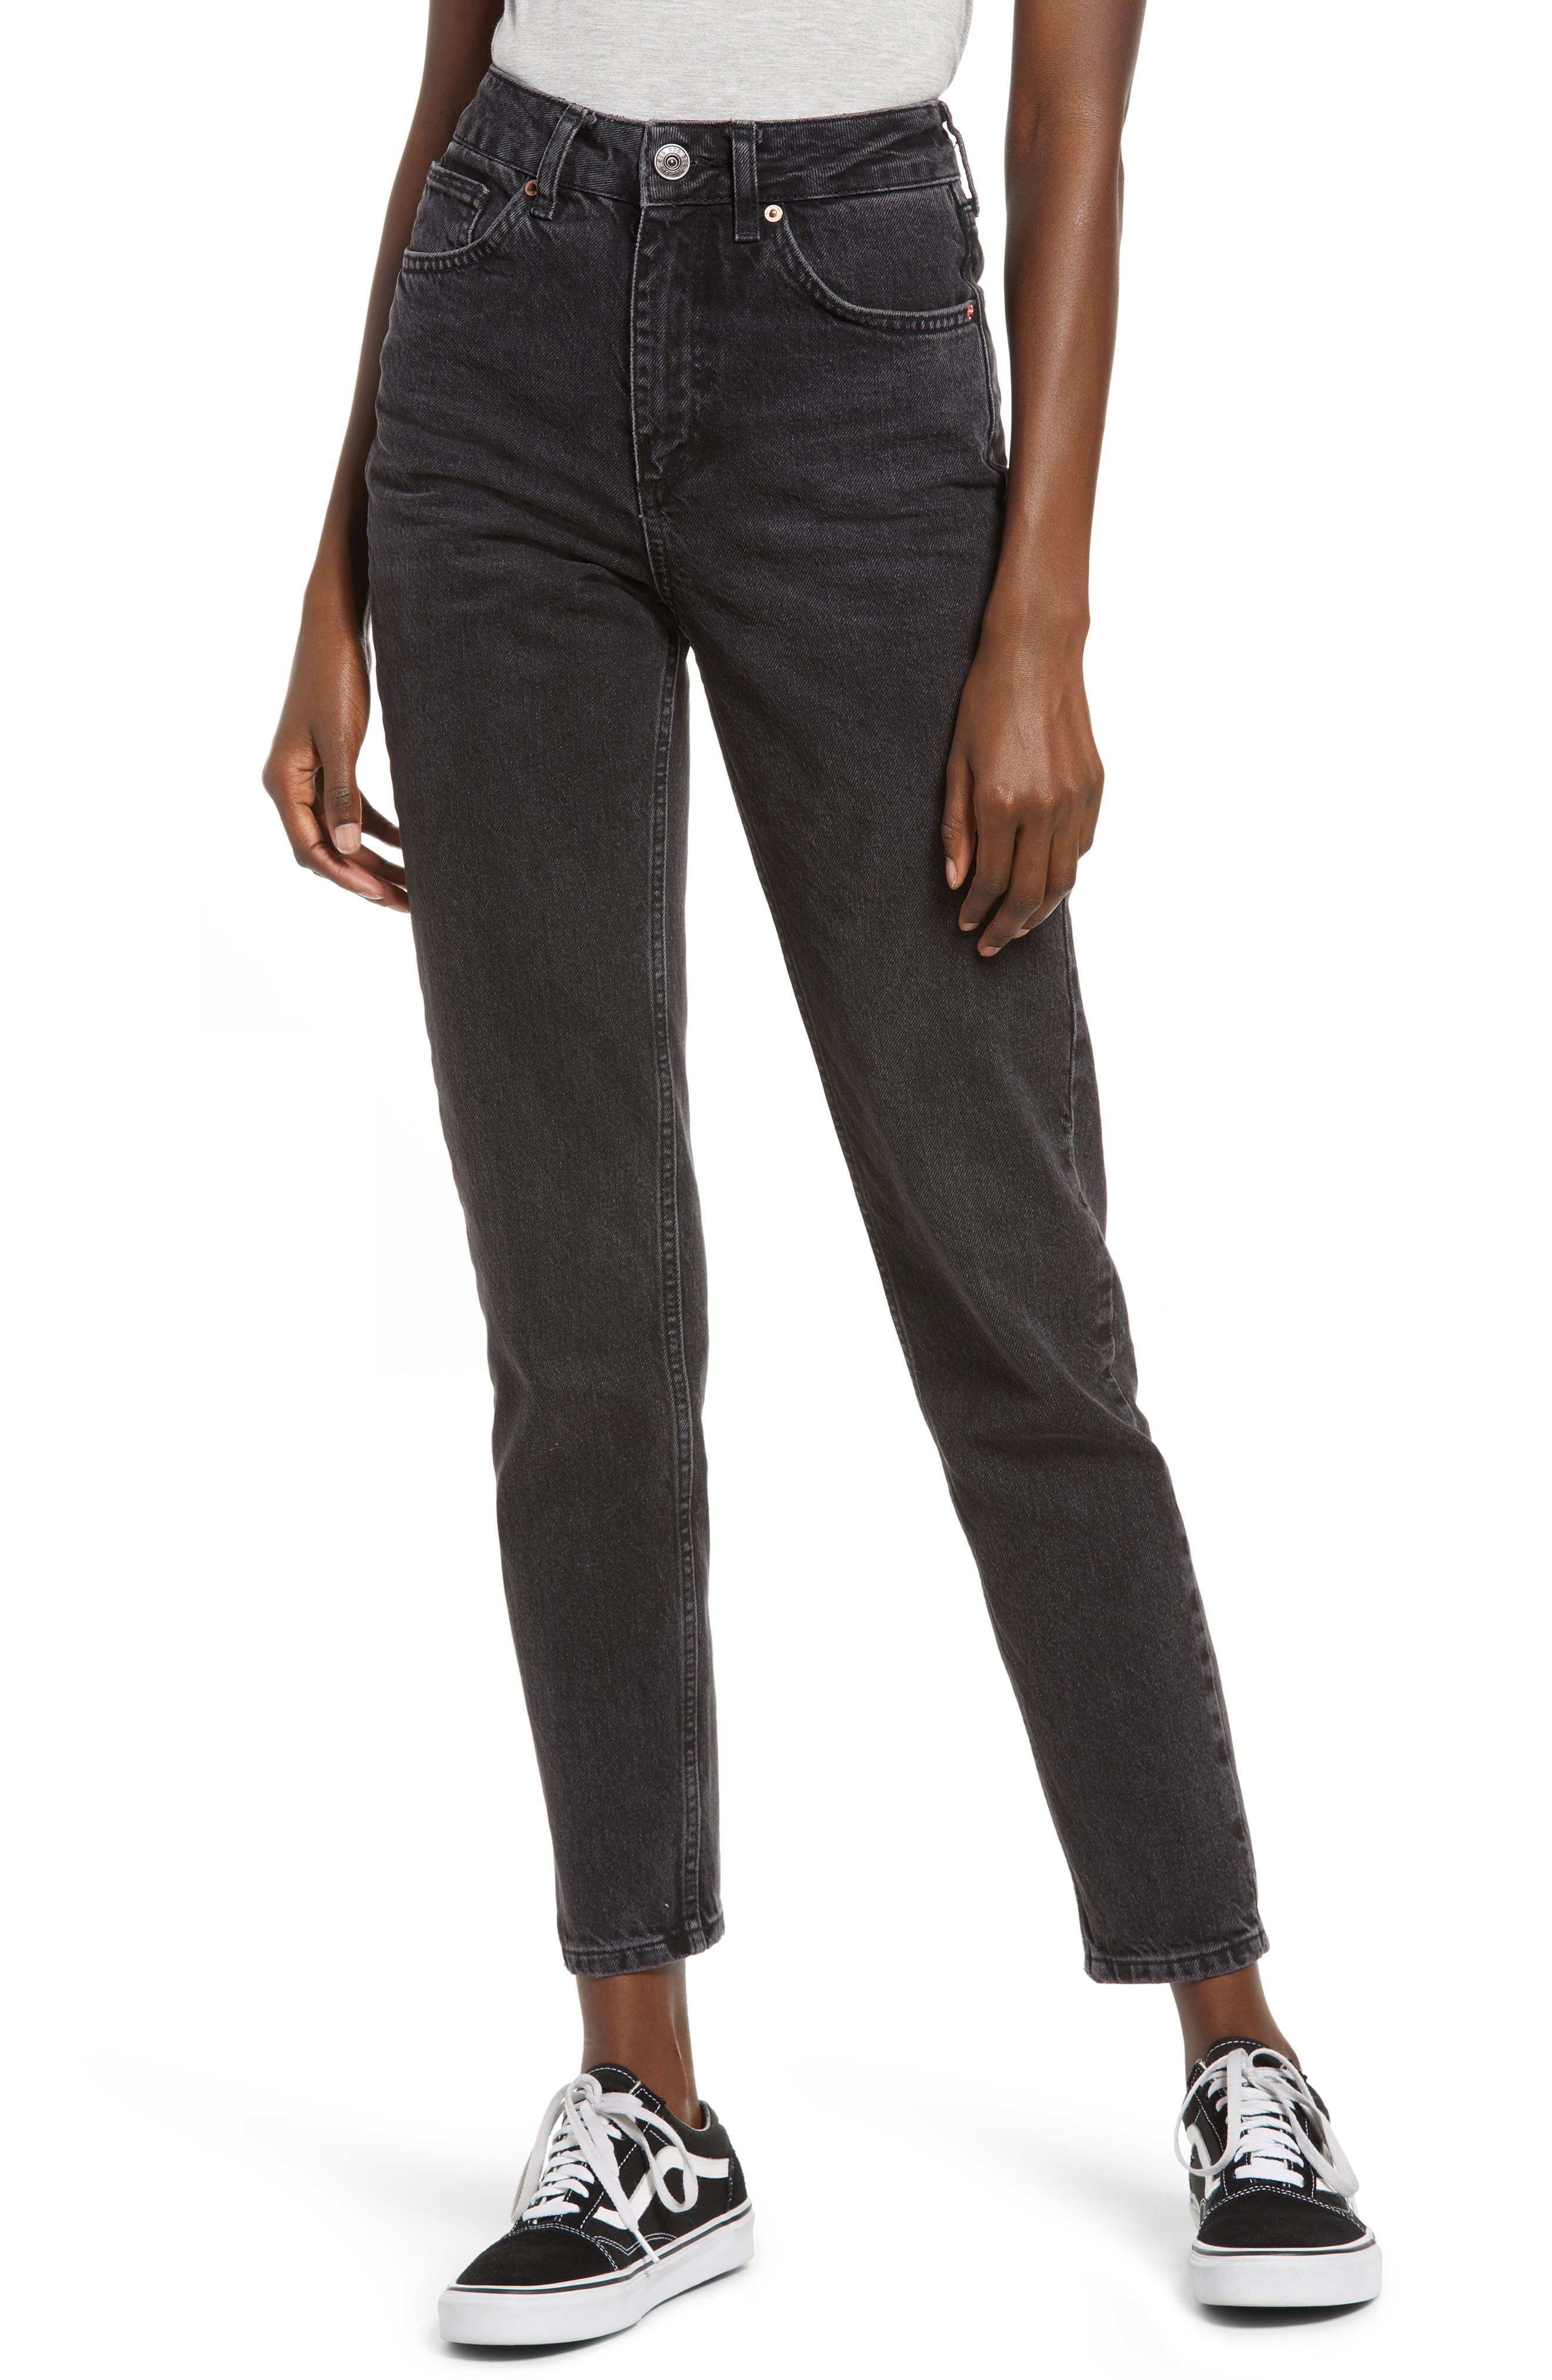 urban outfitters black mom jeans